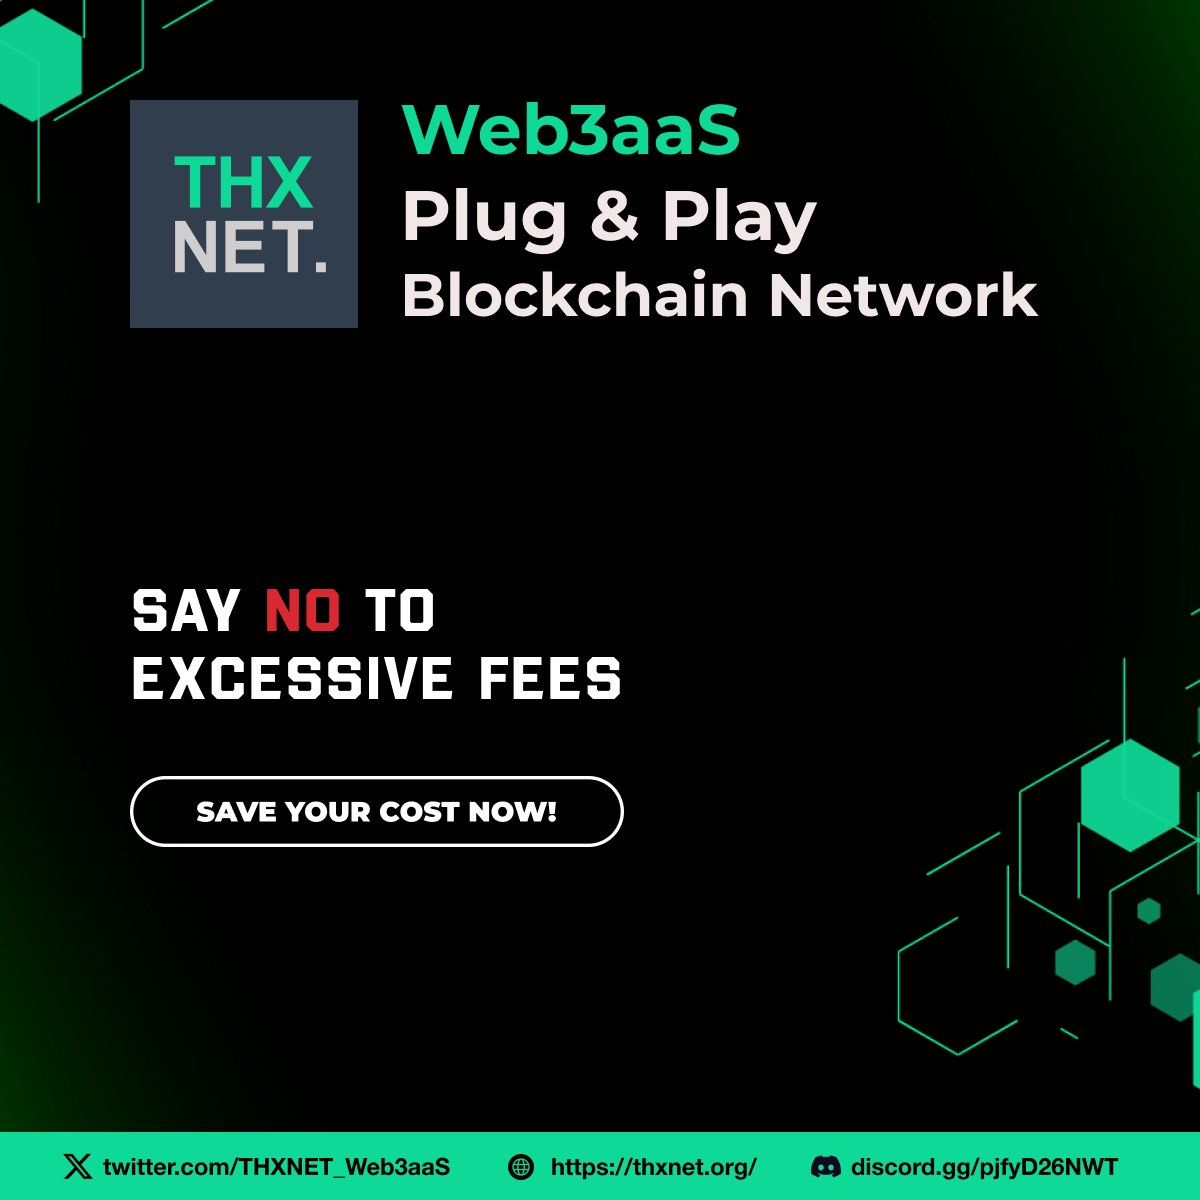 💡Say no to excessive fees! Switch to THXNET. for cost-effective alternatives & allocate your resources wisely. 💰Save your cost now! #THXNET #Blockchain